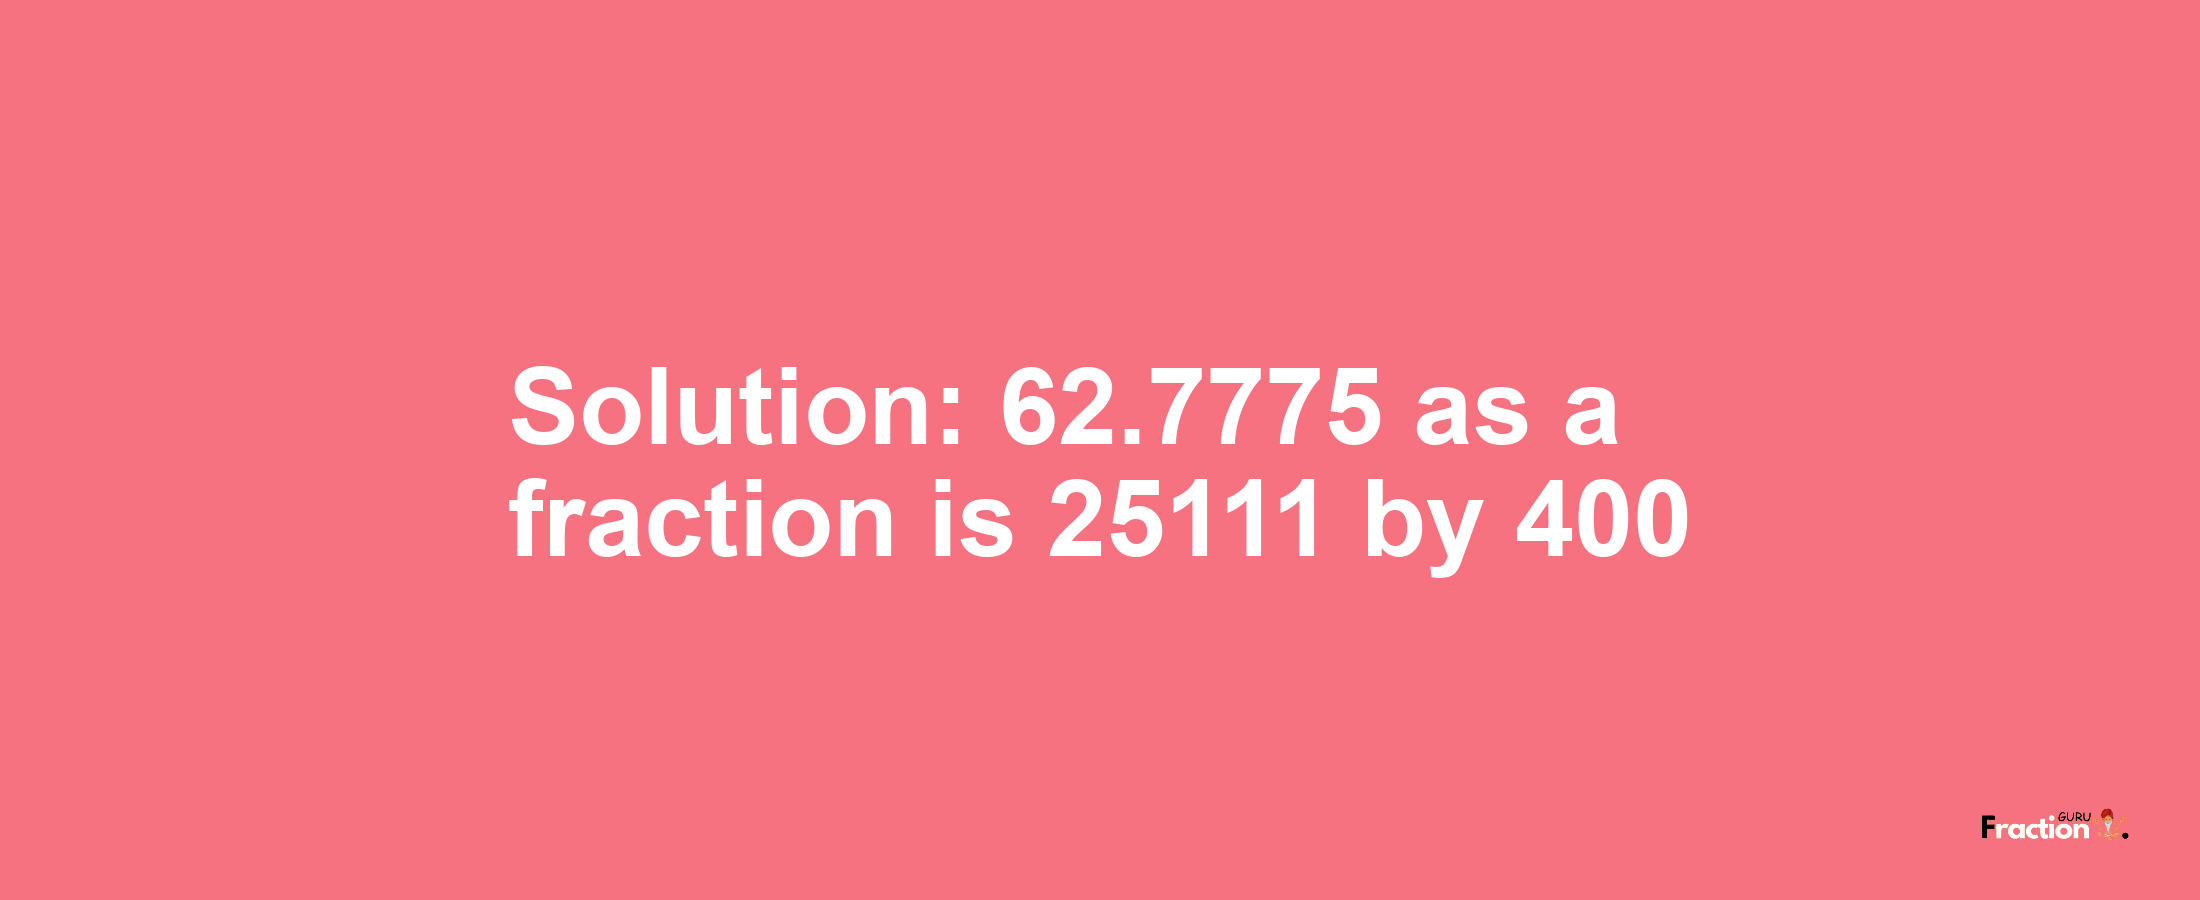 Solution:62.7775 as a fraction is 25111/400